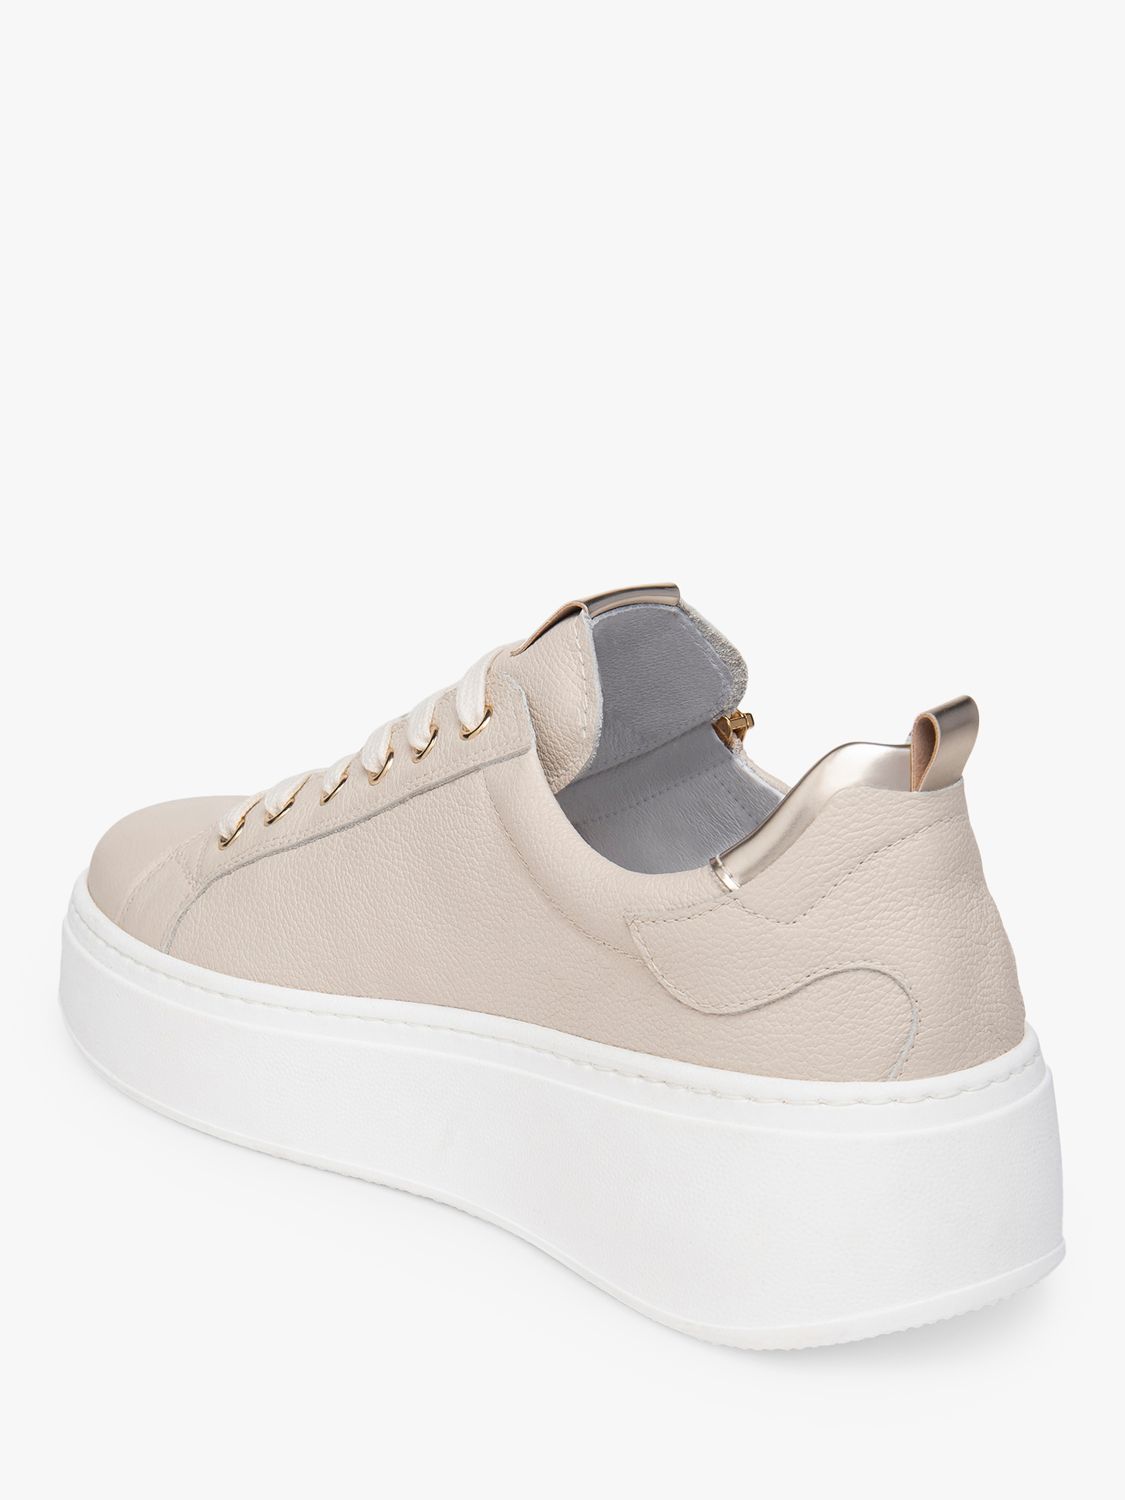 Buy NeroGiardini Chunky Leather Trainers Online at johnlewis.com